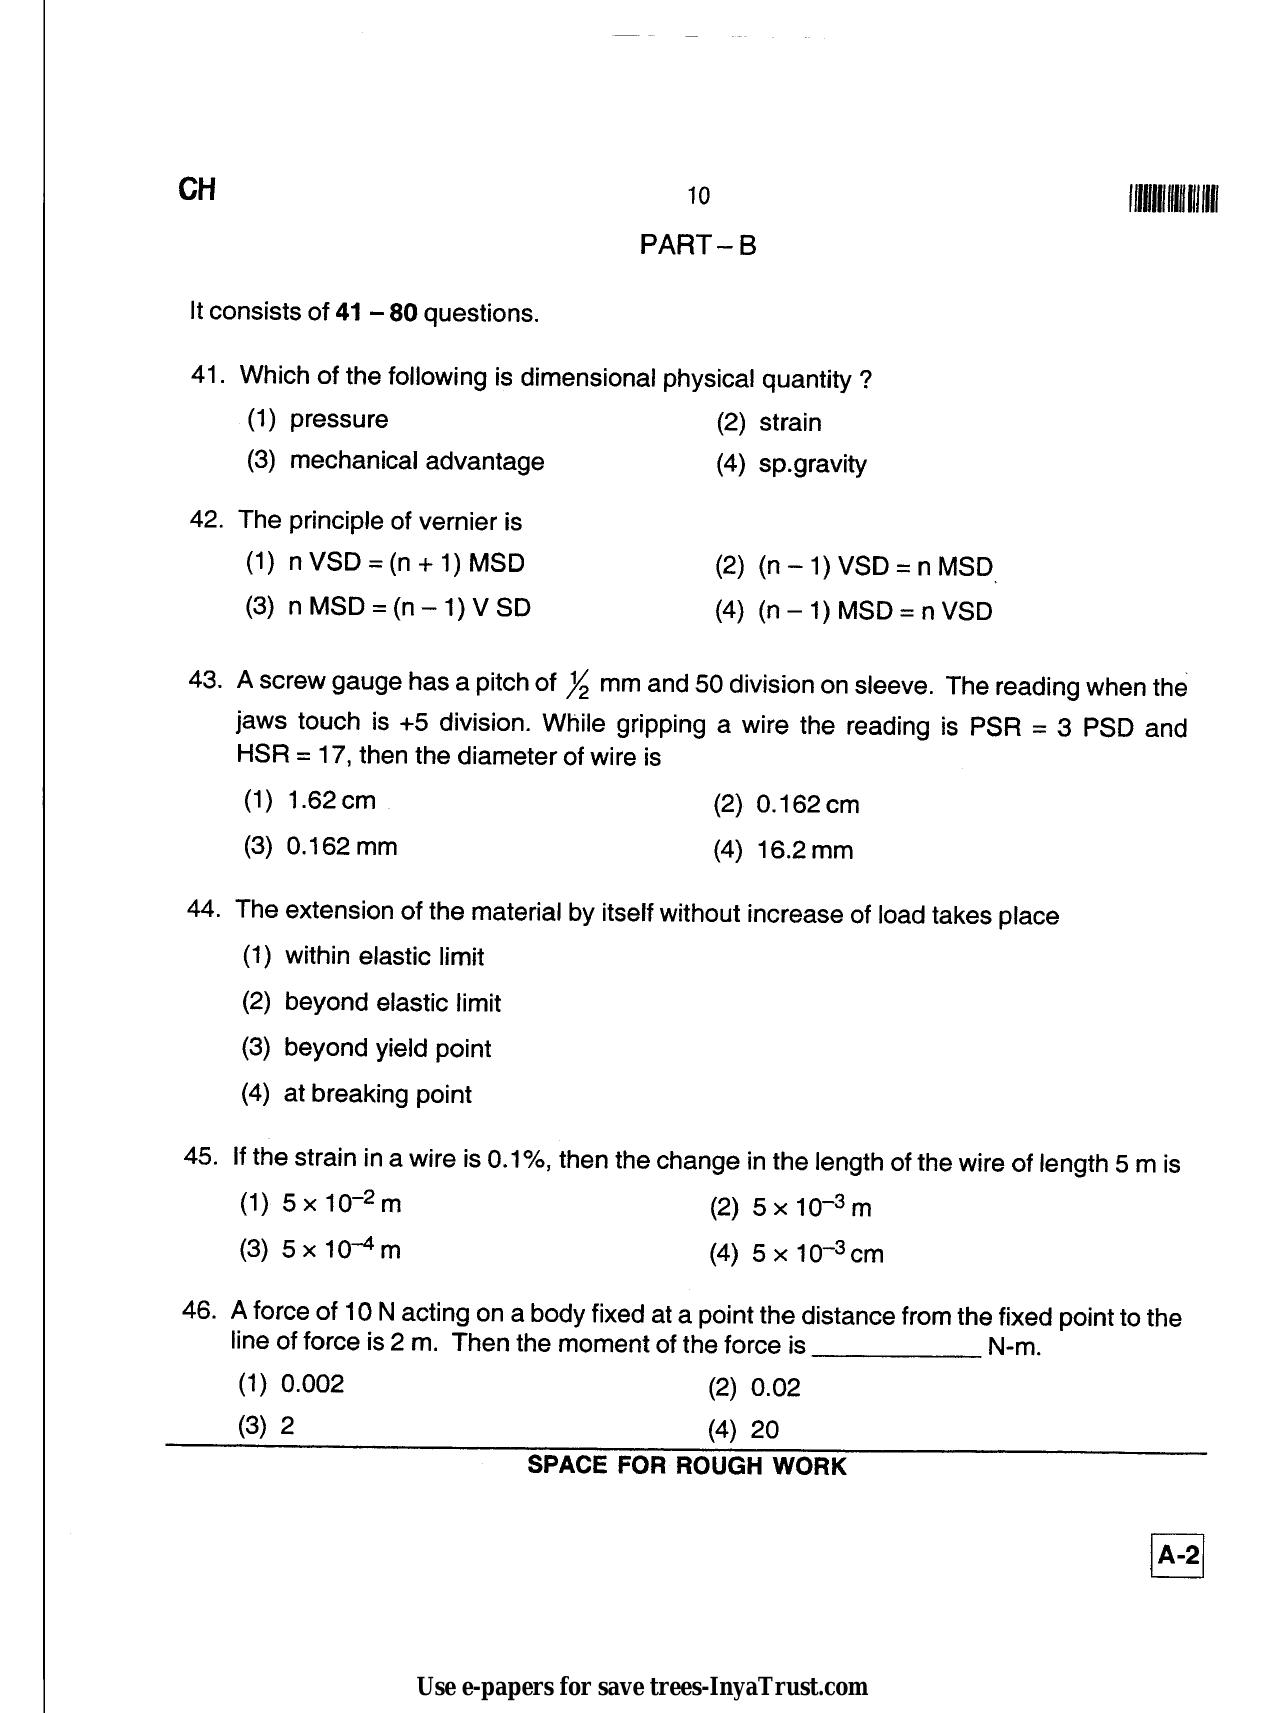 Karnataka Diploma CET- 2013 Chemical Engineering / Polymer Technology Question Paper - Page 10